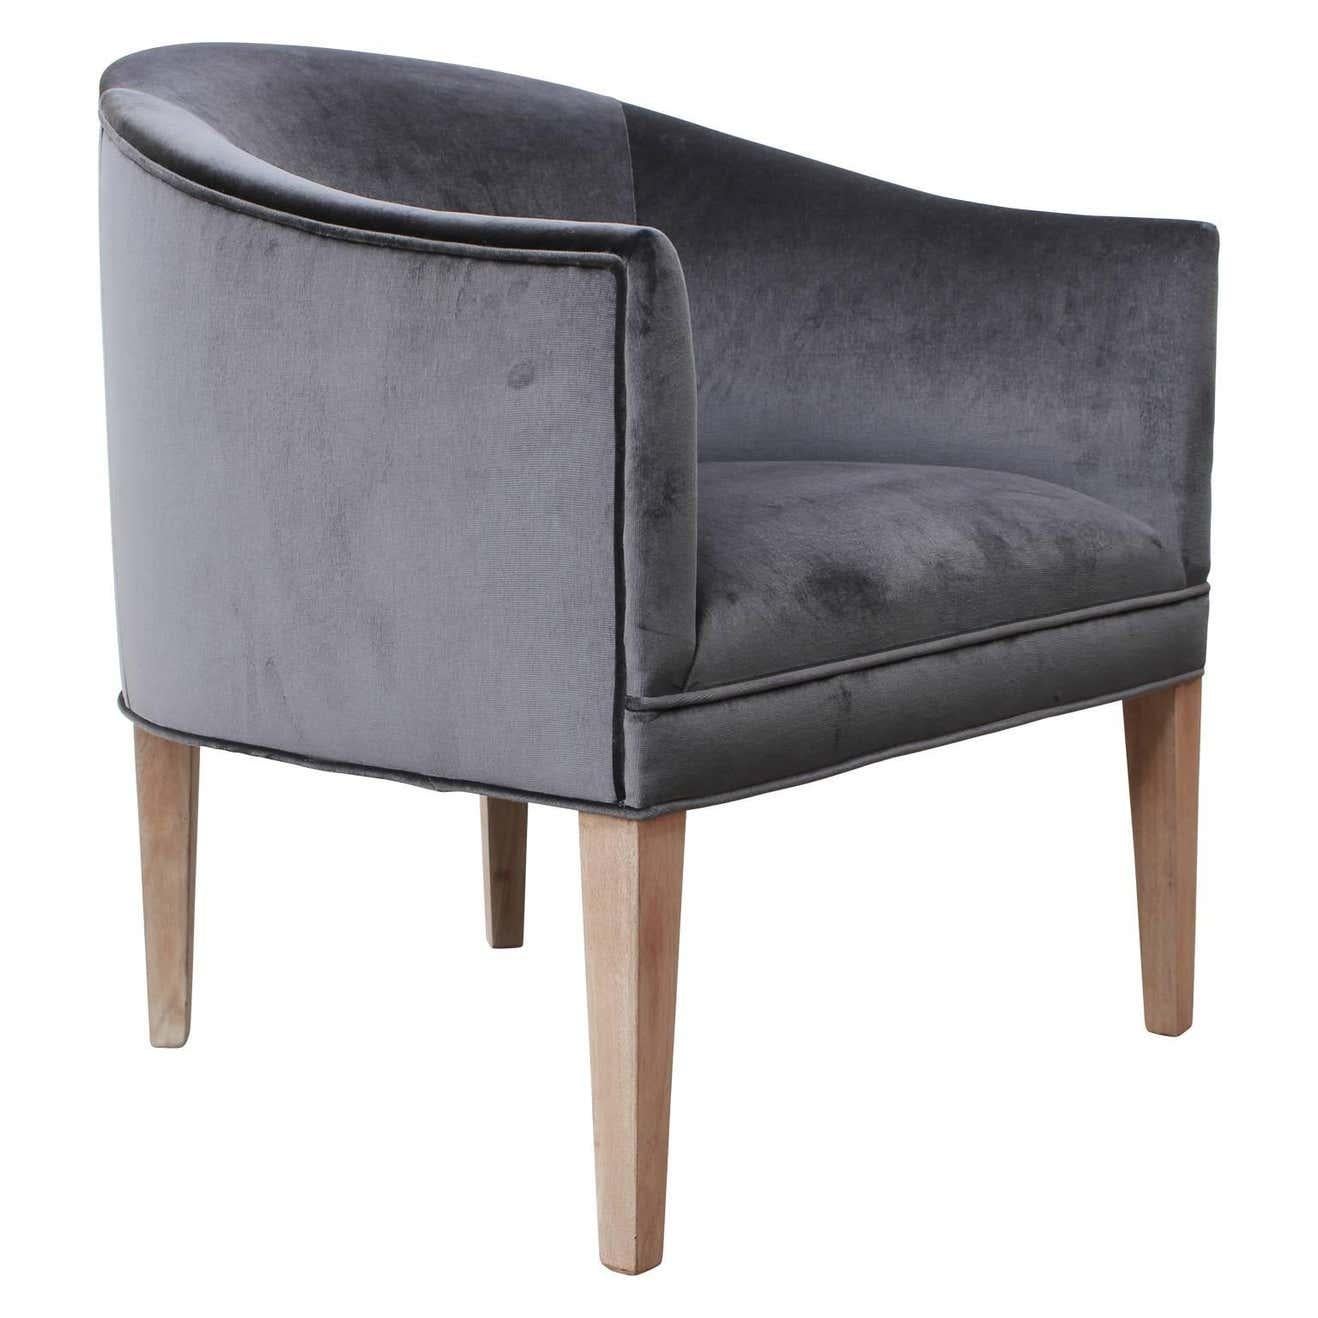 Single modern grey velvet barrel back club chairs. Recently refinished and freshly upholstered in lush deep grey velvet. Perfect for any modern or mid-mod home.